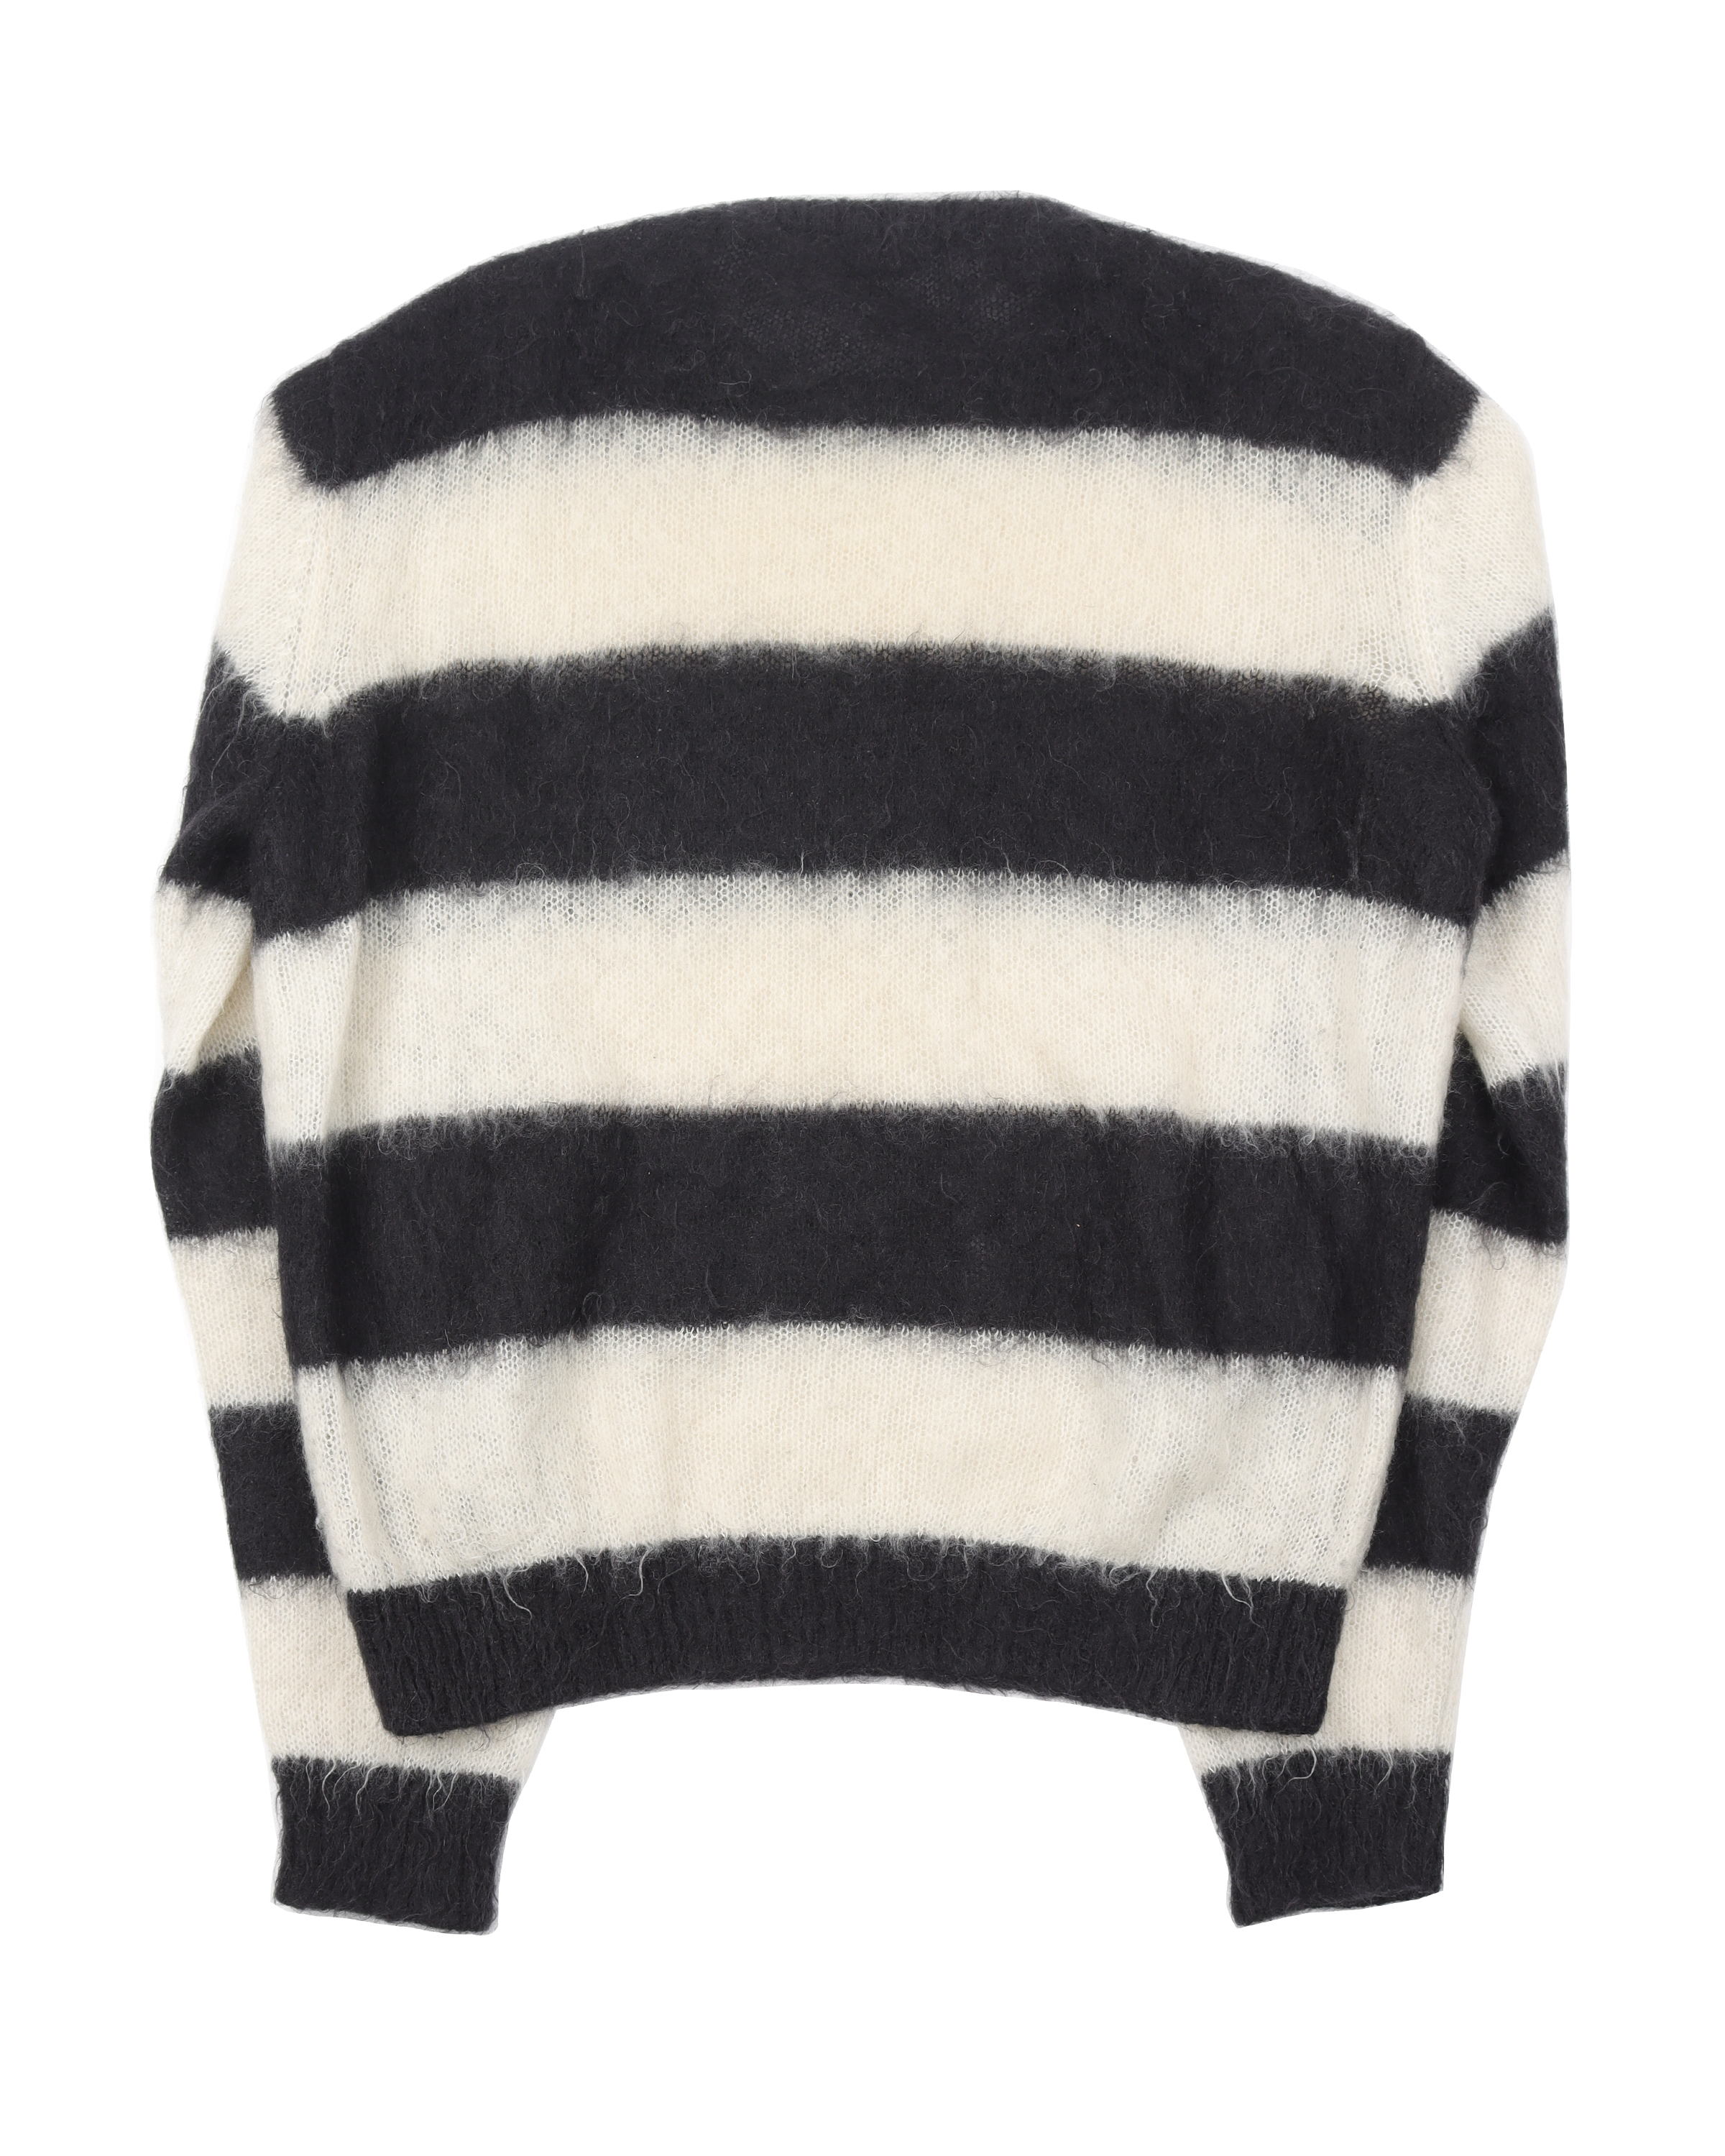 Mohair Blend Striped Sweater (2018)